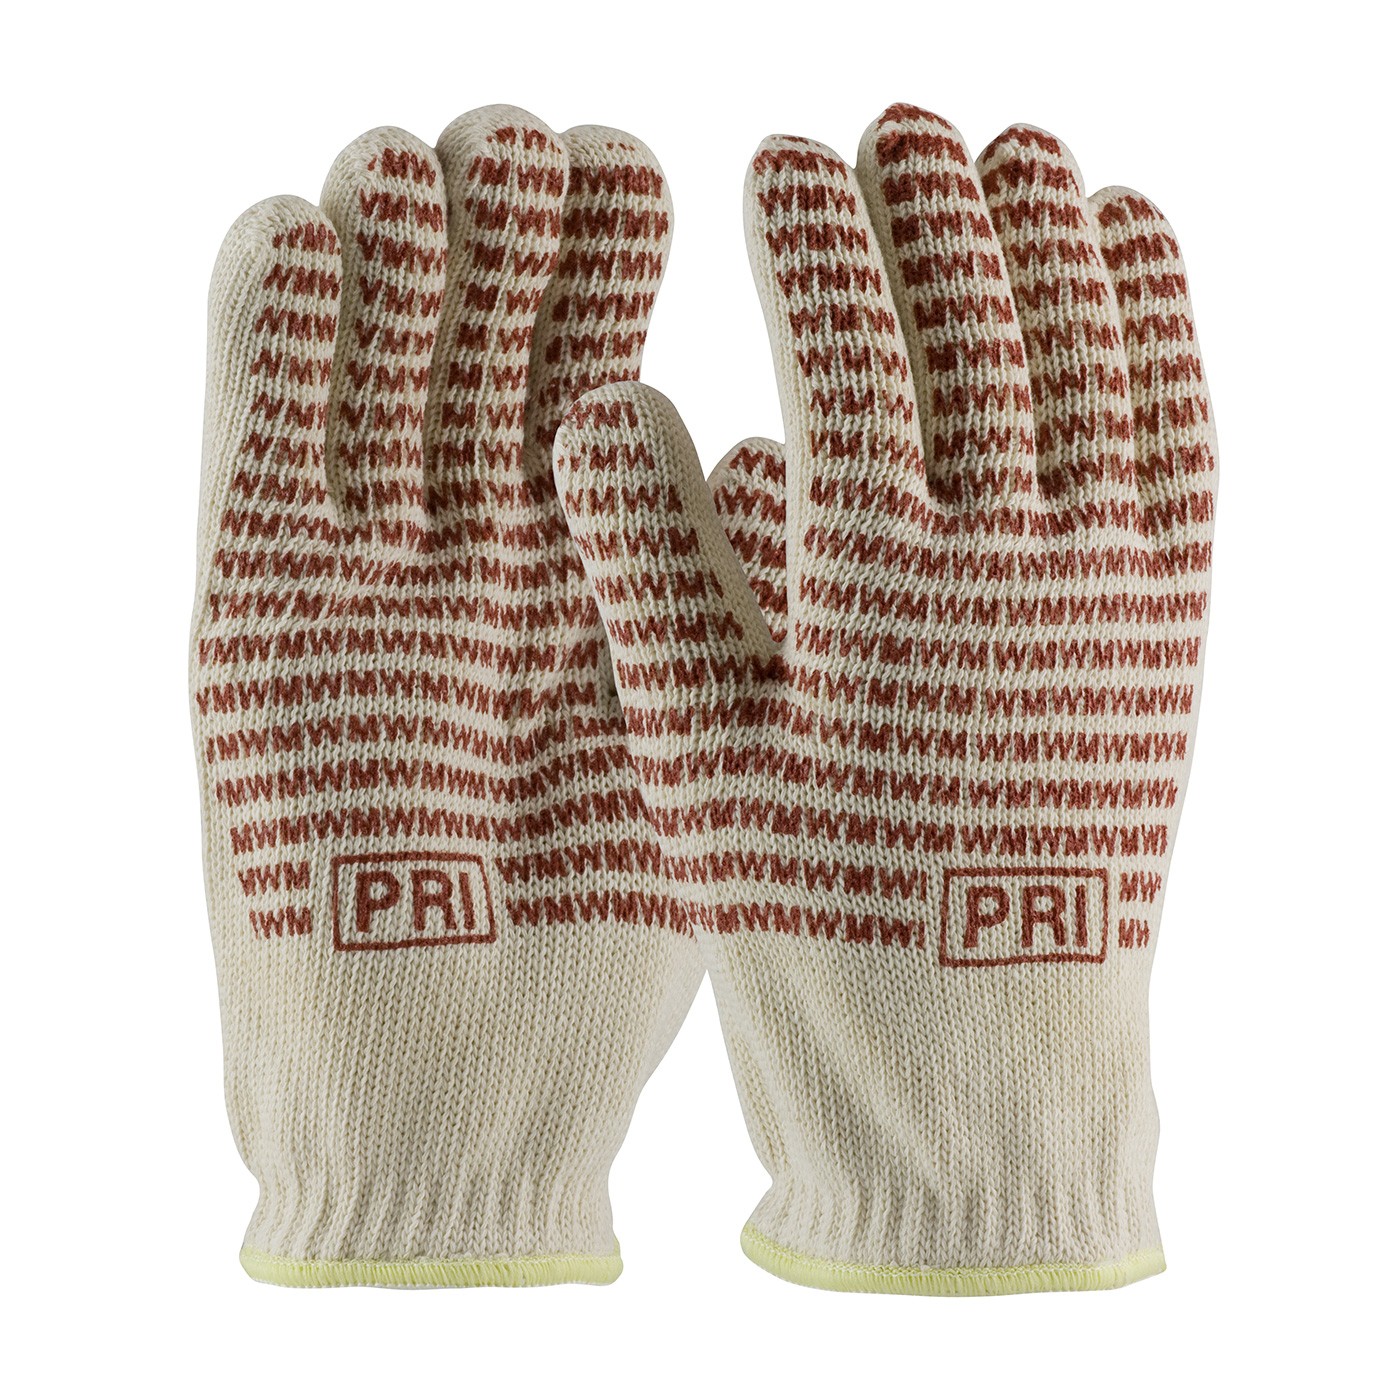 PIP® Double-Layered Cotton Seamless Knit Hot Mill Glove with Double-Sided EverGrip™ Nitrile Coating - 24 oz  (#43-502)